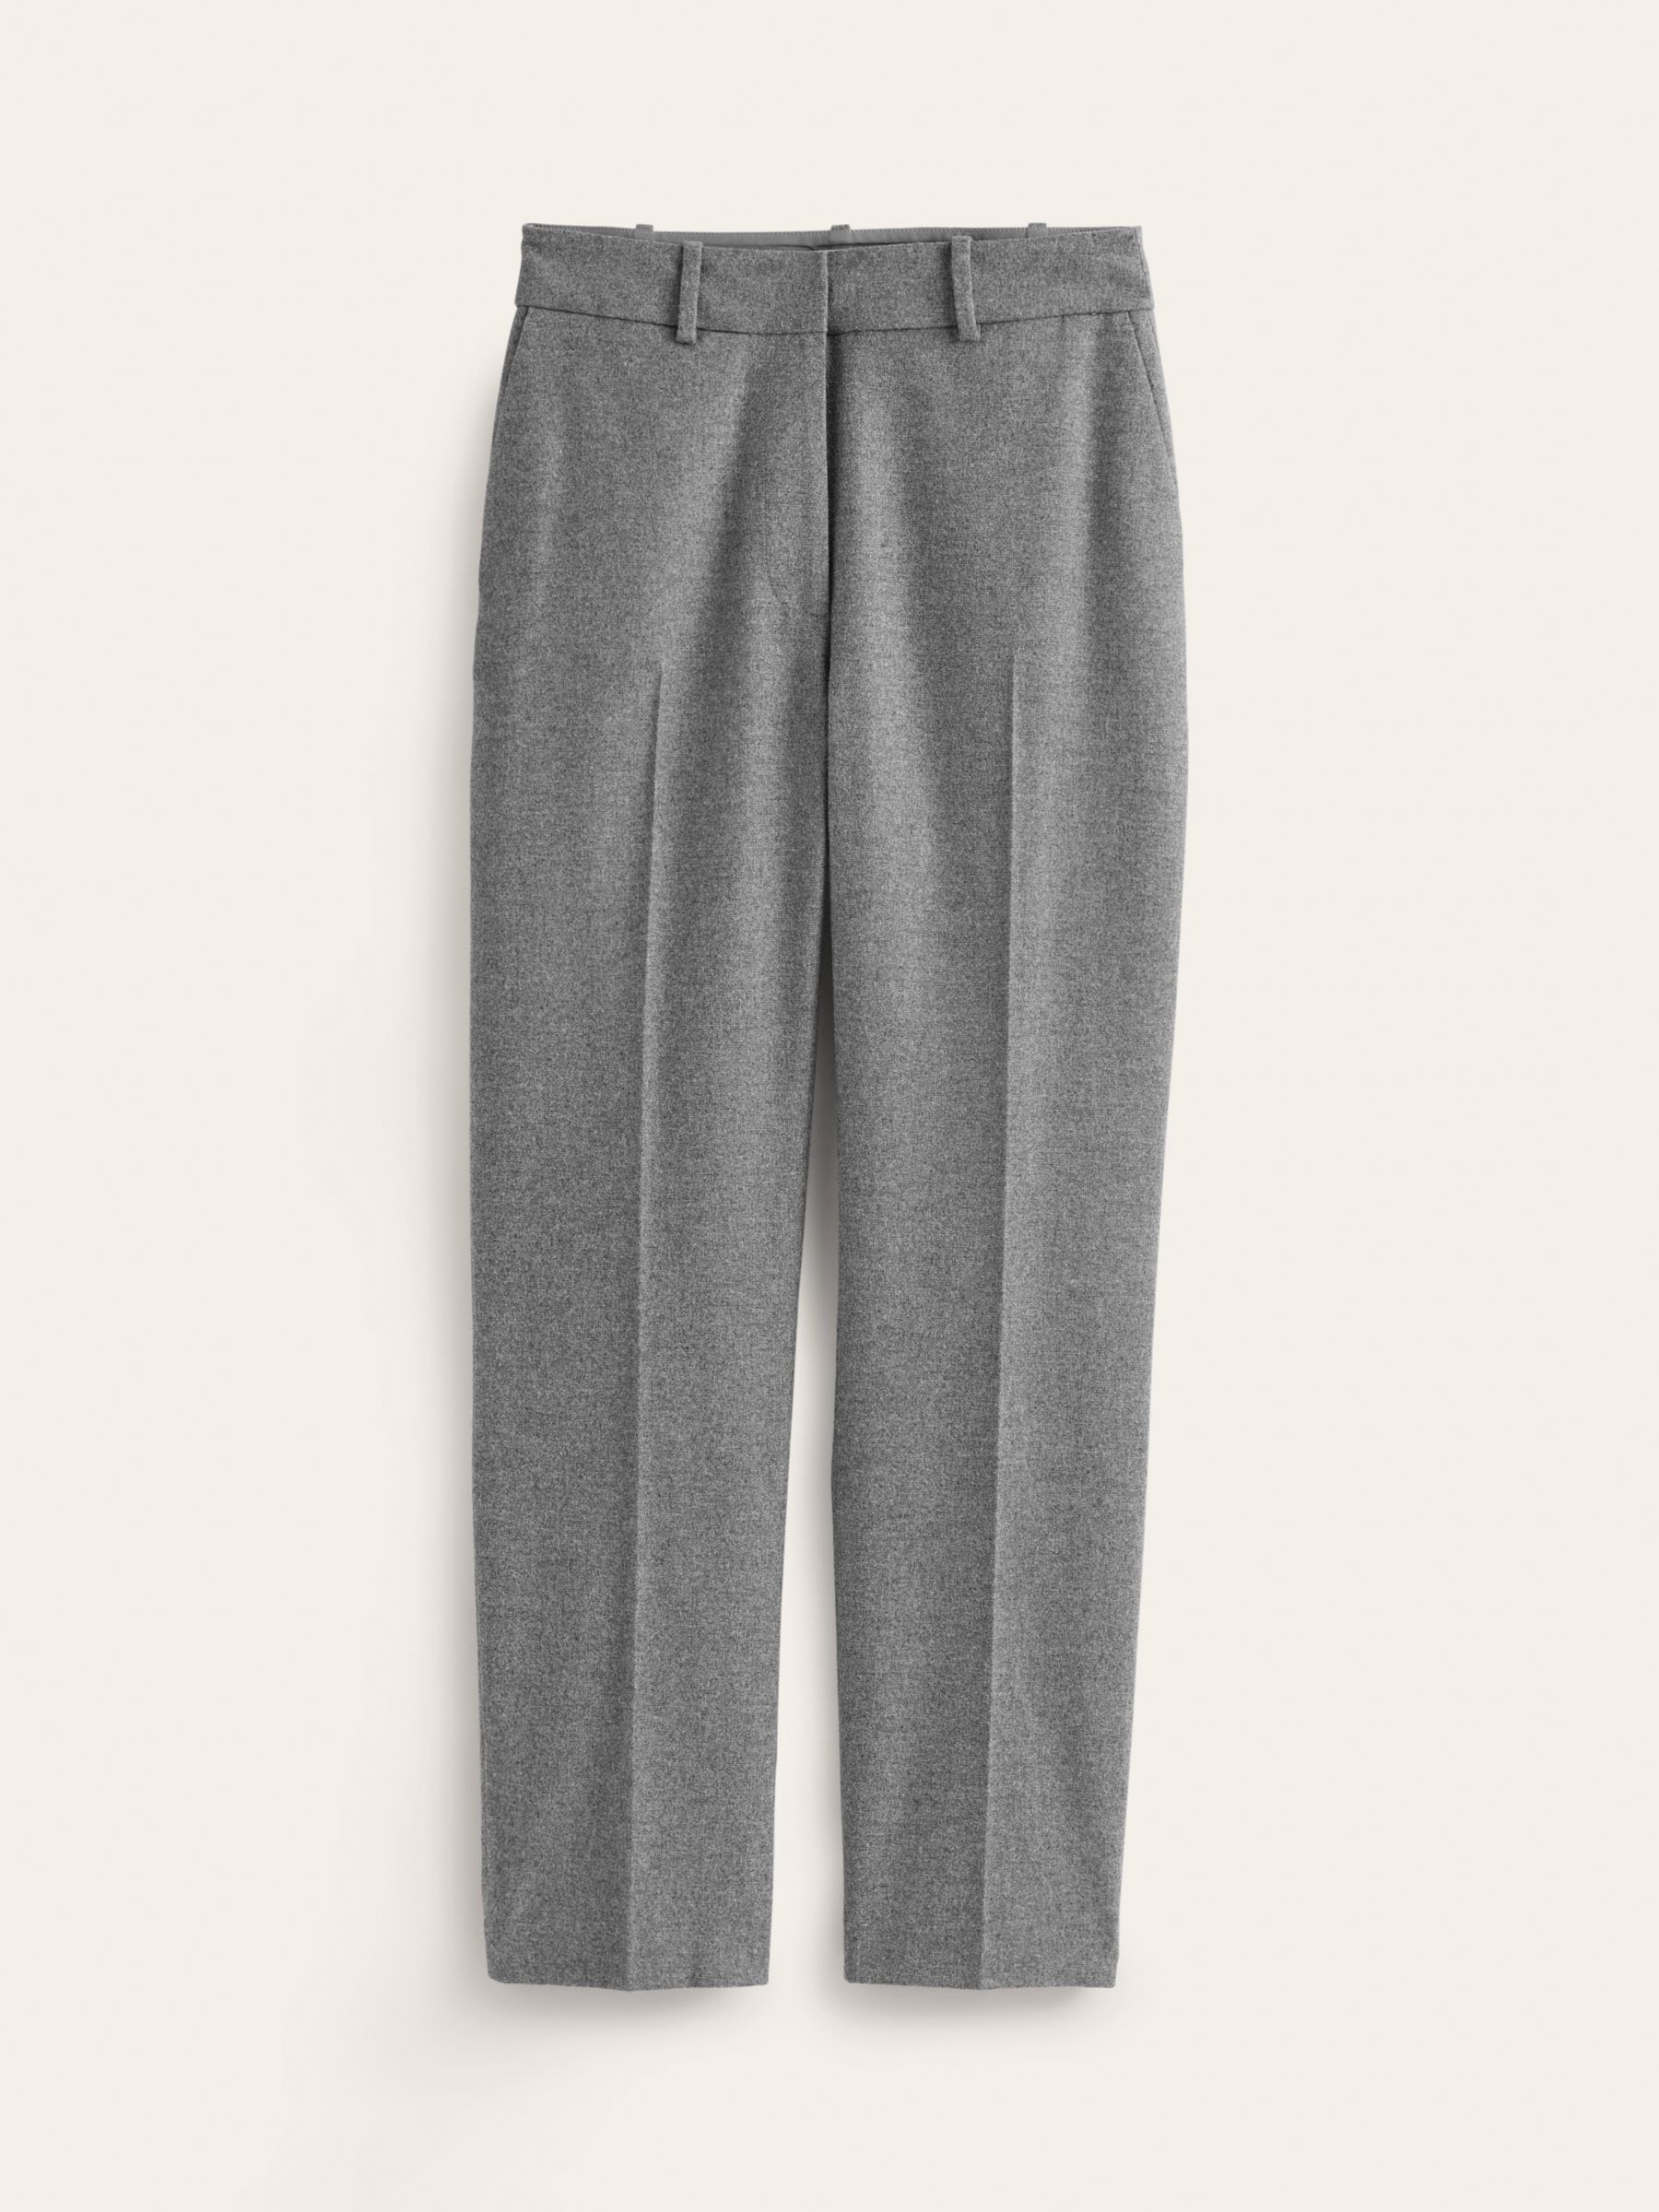 Boden Kew Wool Blend Trousers, Charcoal at John Lewis & Partners